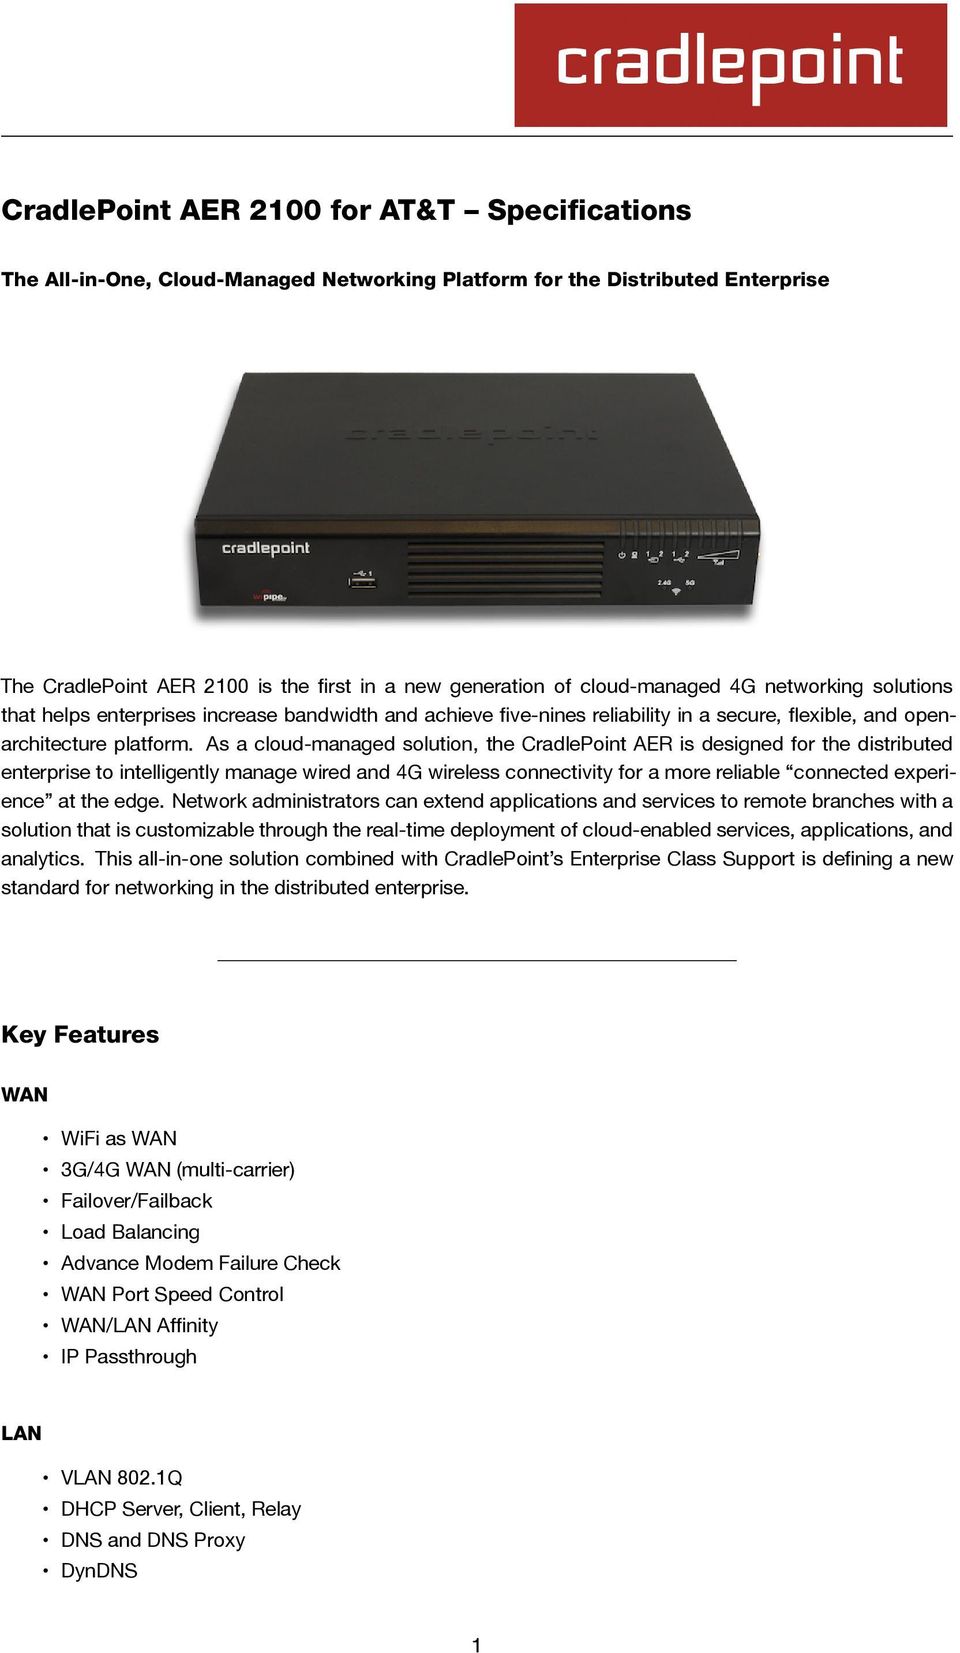 As a cloud-managed solution, the CradlePoint AER is designed for the distributed enterprise to intelligently manage wired and 4G wireless connectivity for a more reliable connected experience at the